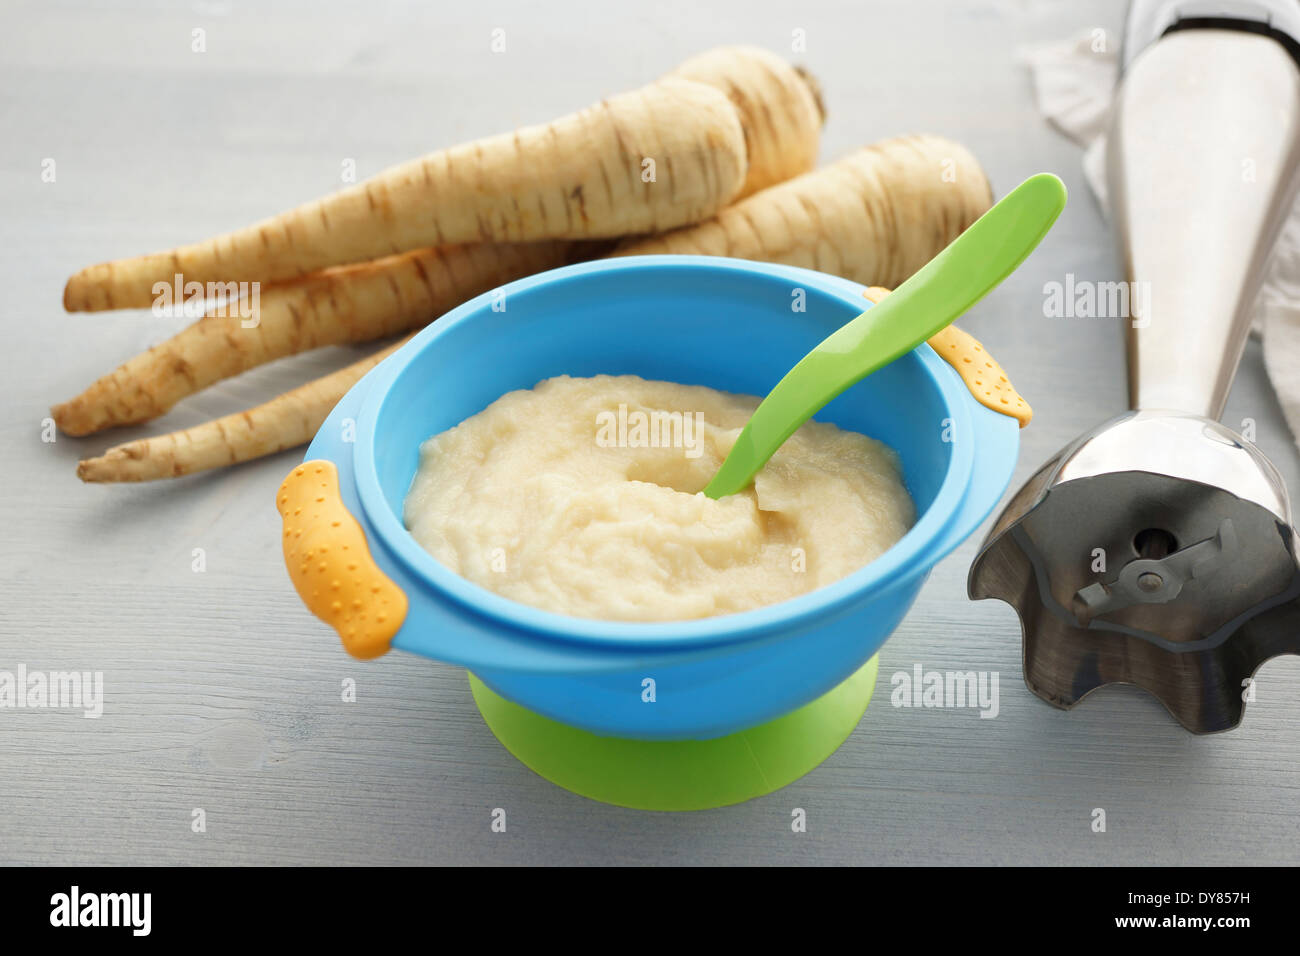 Immersion blender, bowl of parsnip puree and parsnips on wooden table Stock Photo